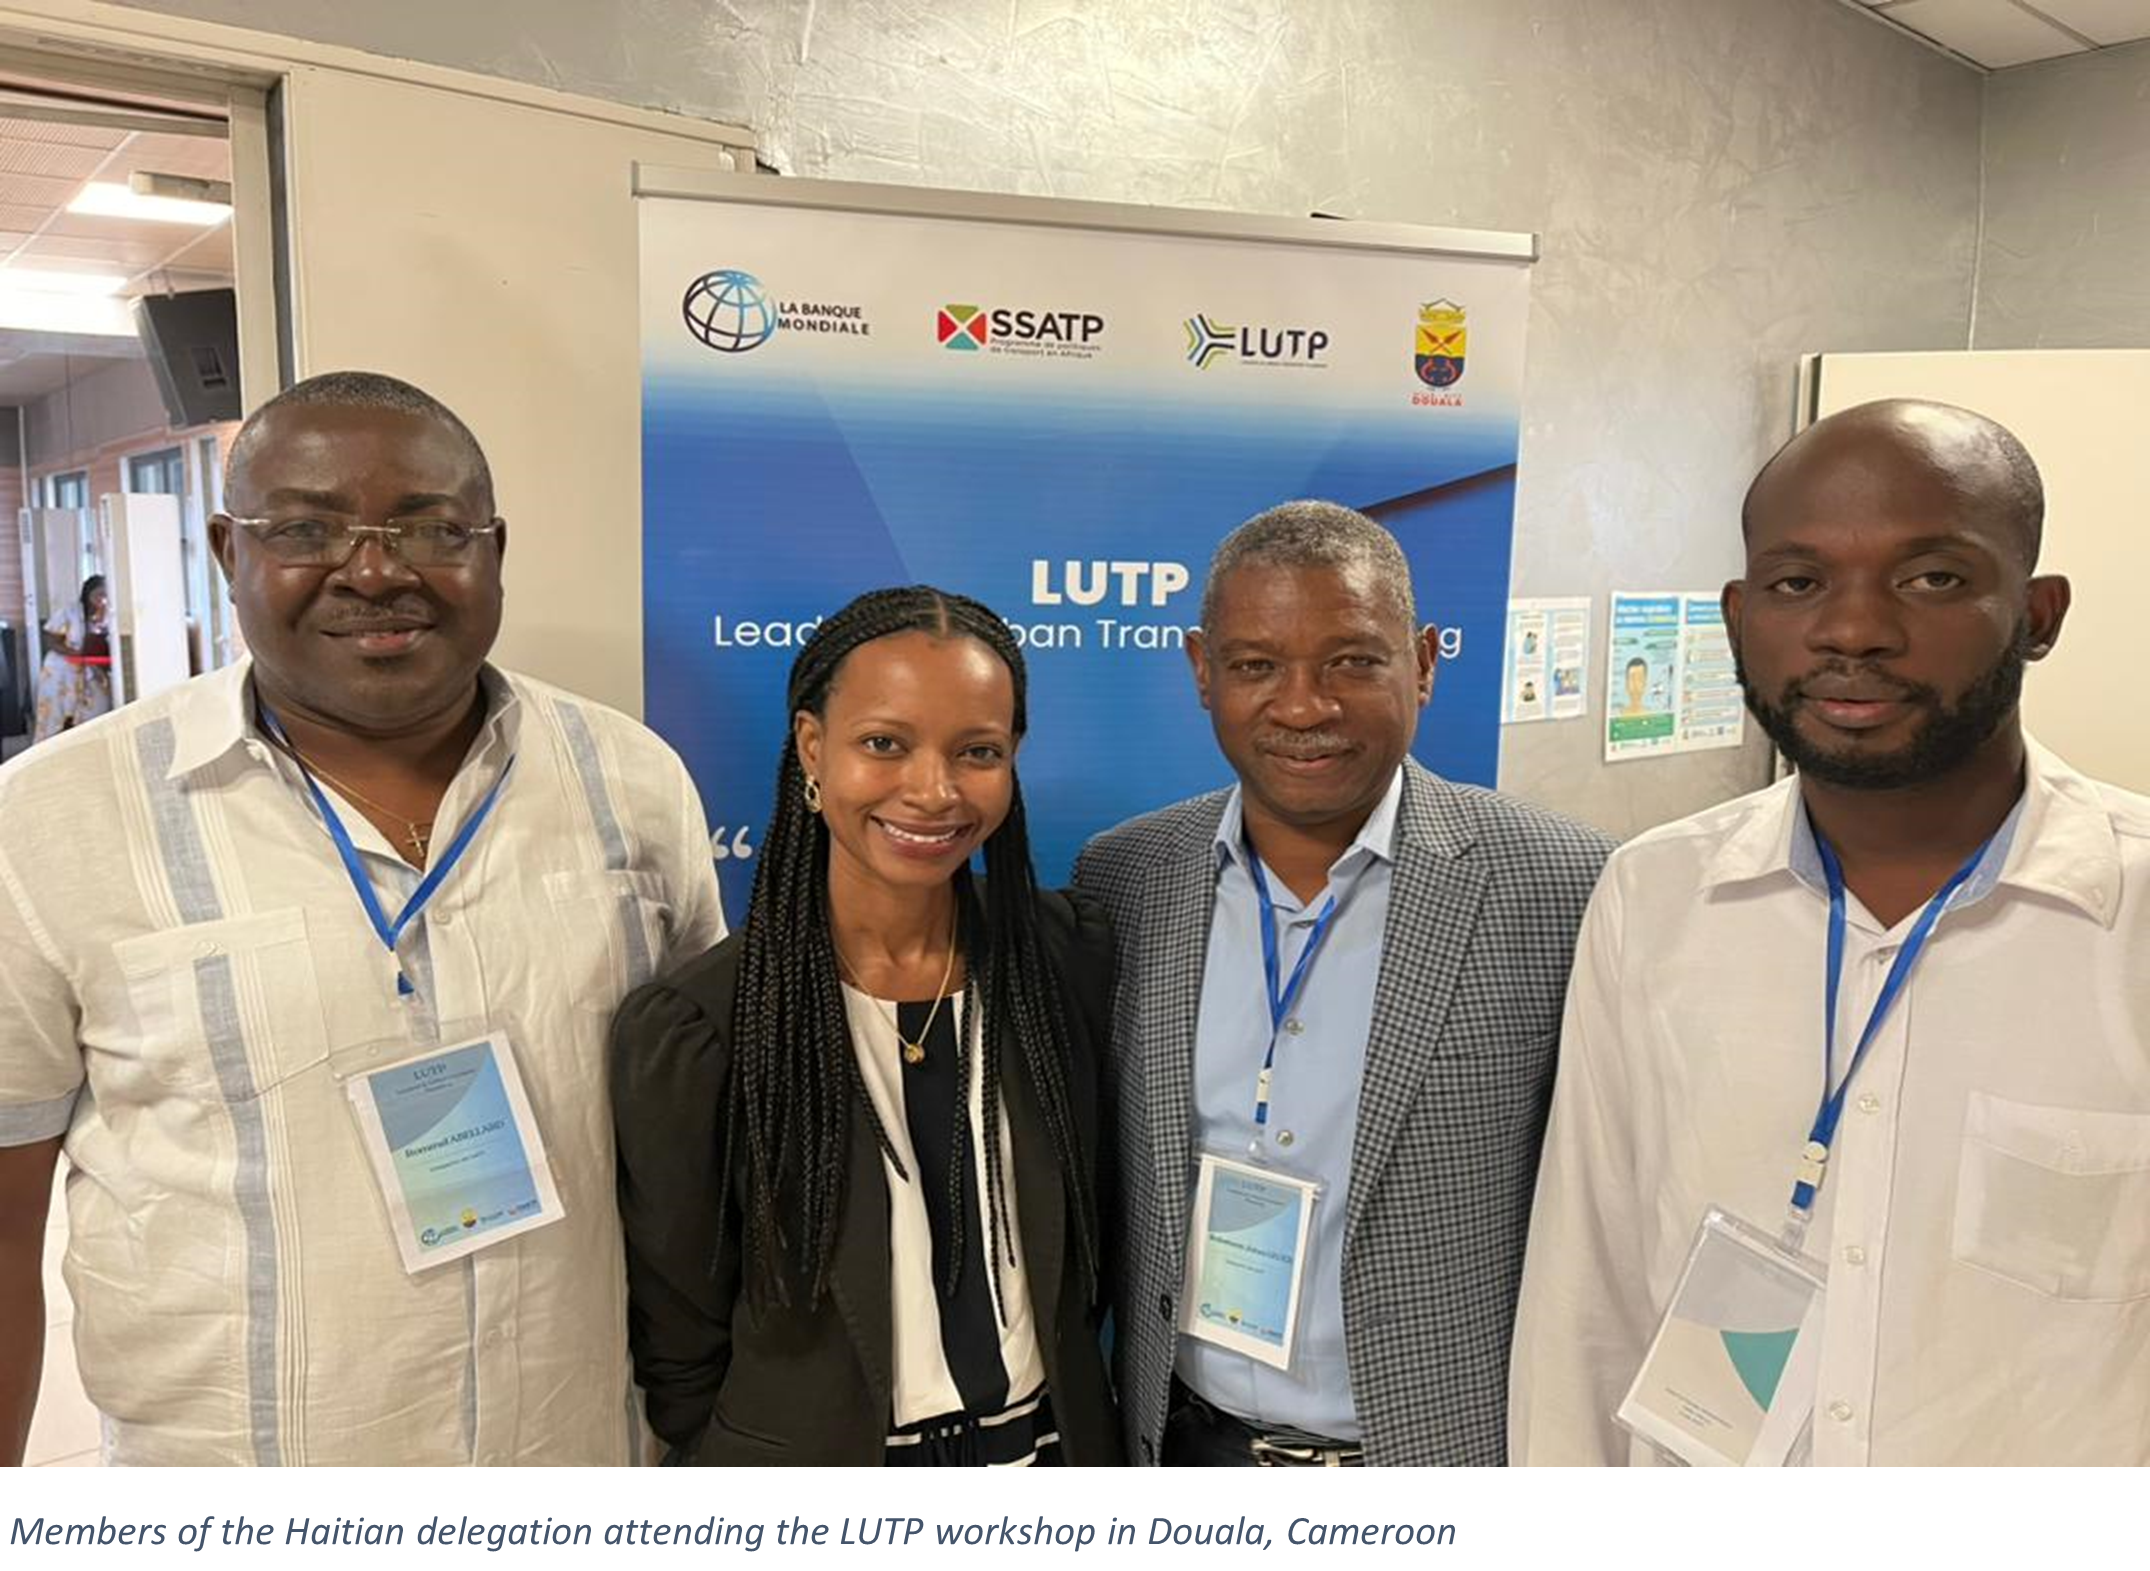  Members of the Haitian delegation attending the LUTP workshop in Douala, Cameroon